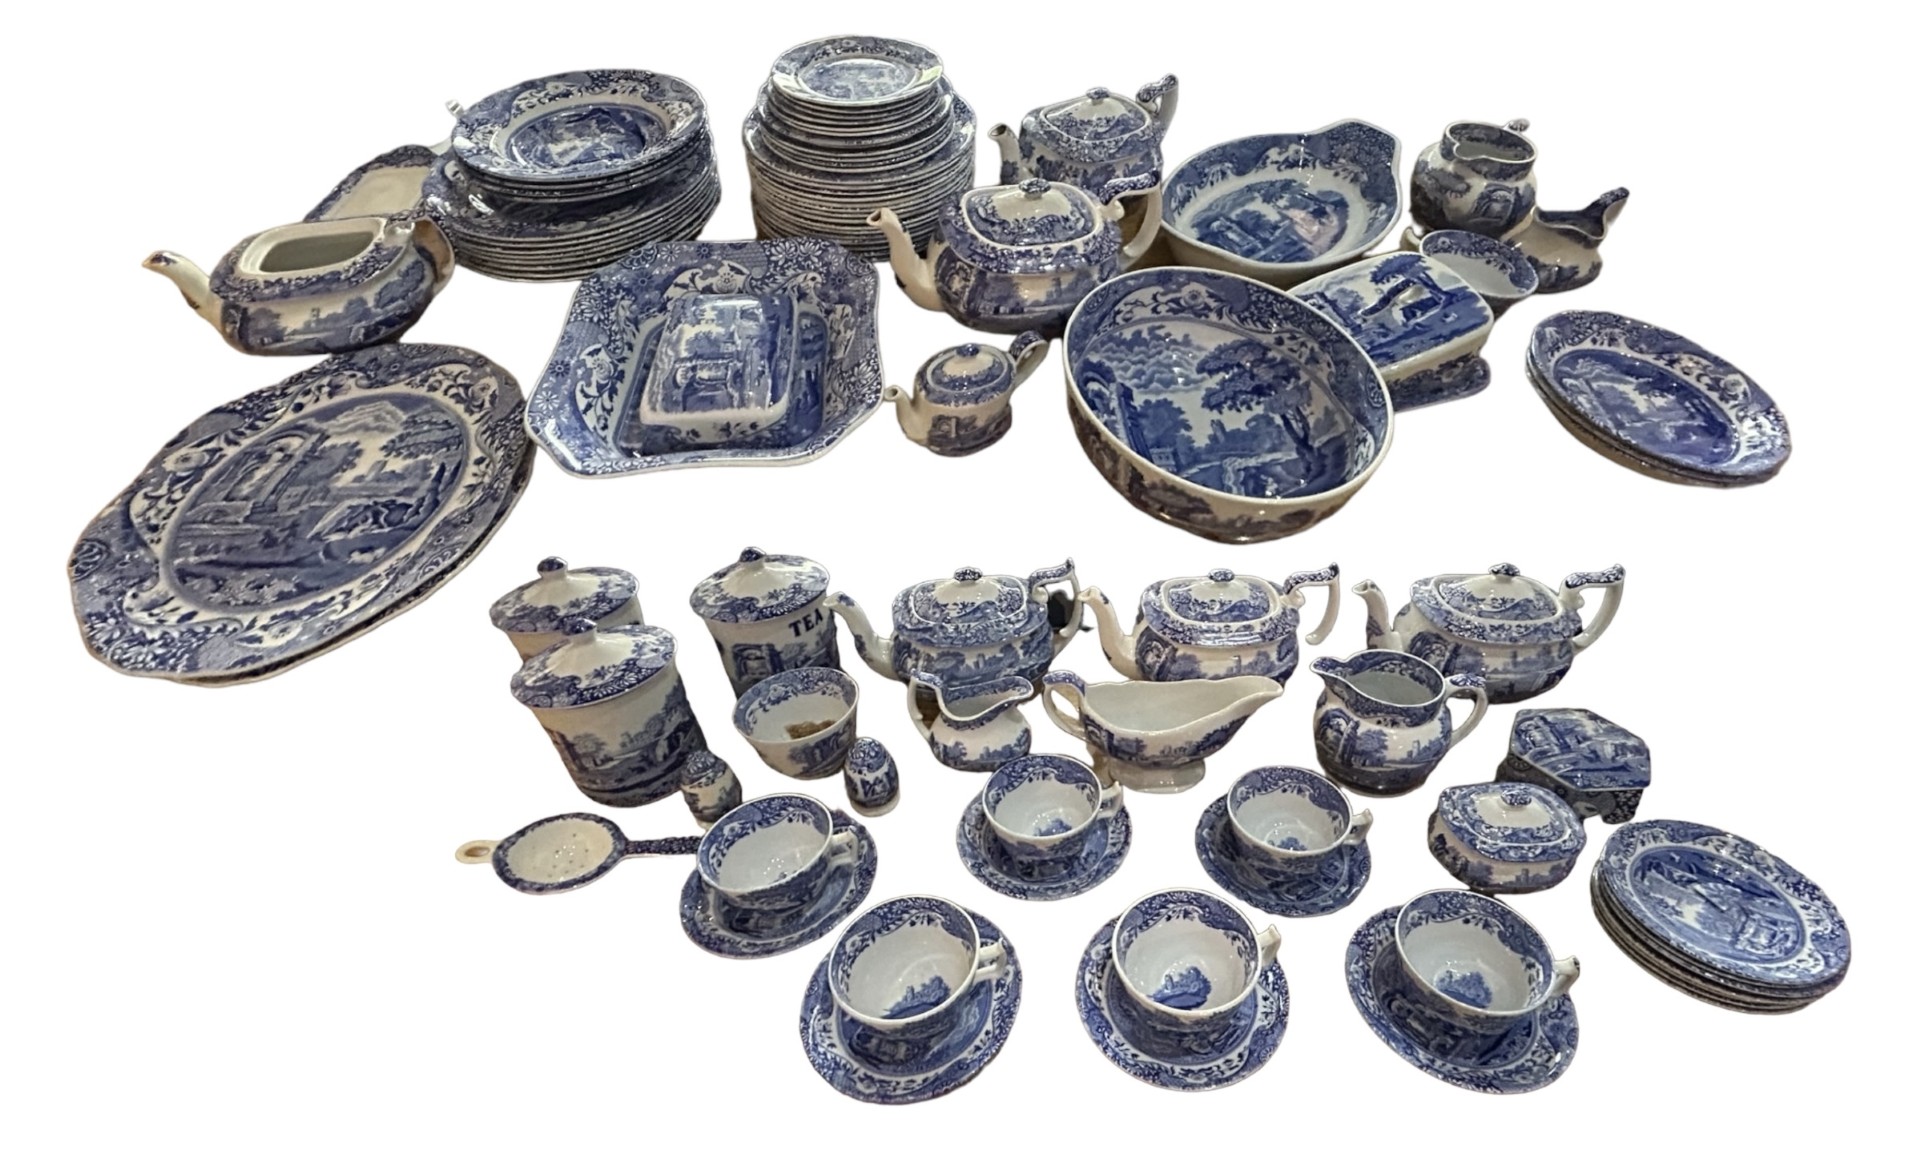 SPODE, LARGE COLLECTION OF 19TH CENTURY BLUE AND WHITE STONEWARE PORCELAIN ITEMS, TO INCLUDE A